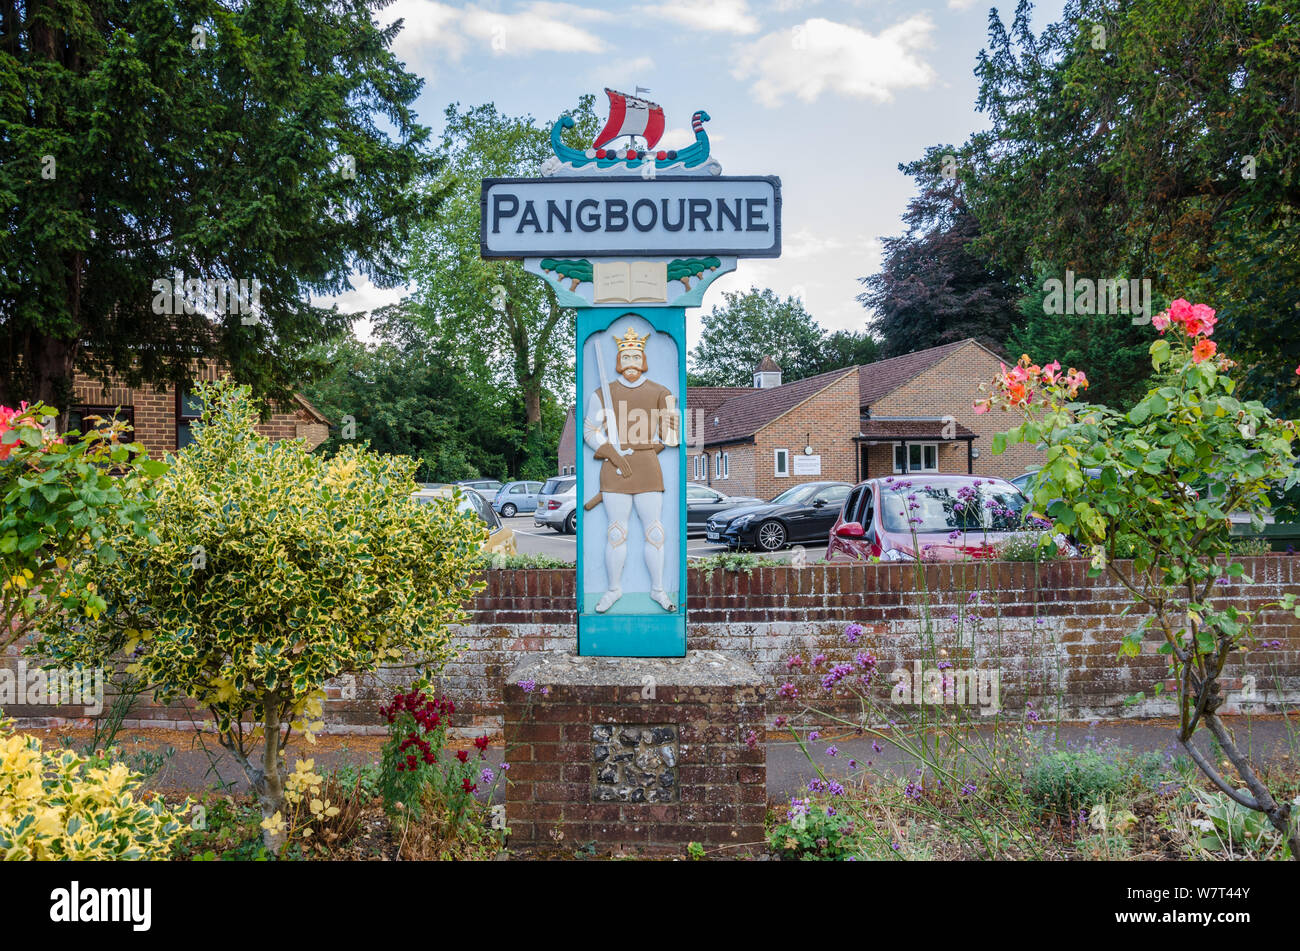 Pangbourne, a village in West Berkshire, UK Stock Photo